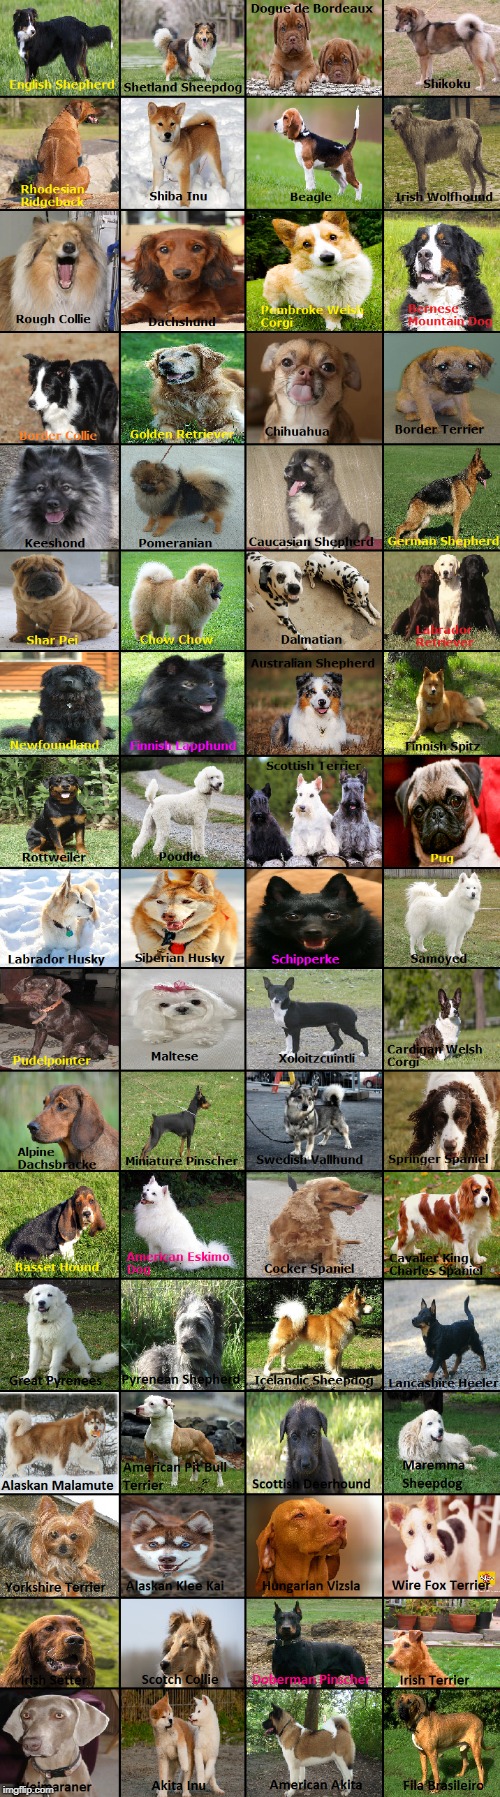 Dog breeds | image tagged in dogs,dog breeds,puppies | made w/ Imgflip meme maker